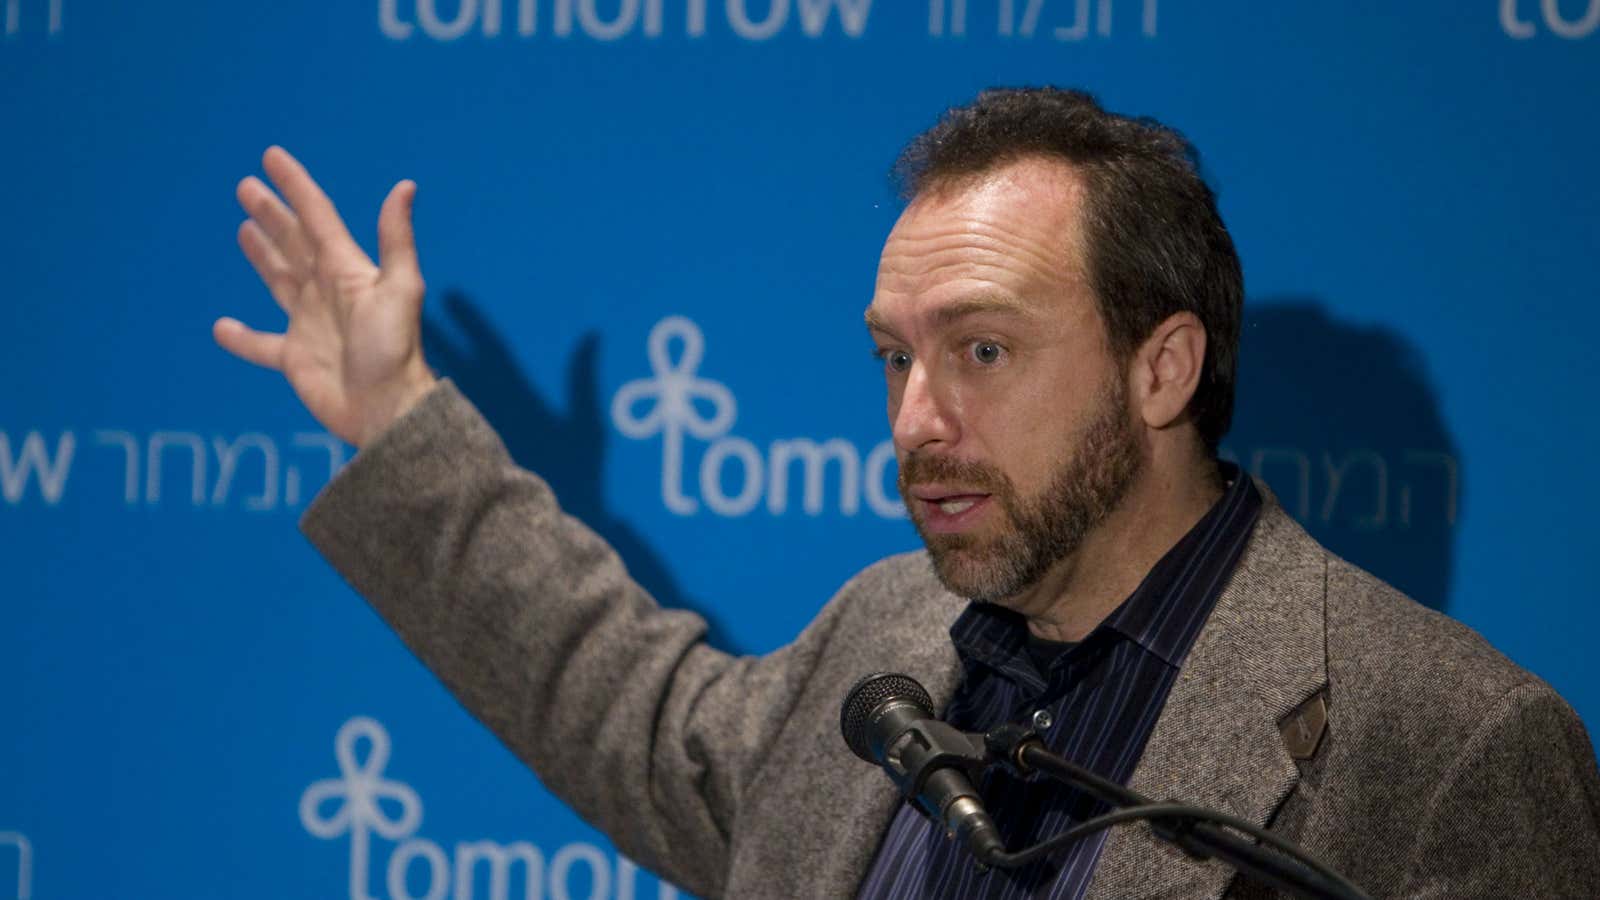 Ready for takeoff? Jimmy Wales says Wikivoyage will launch soon.